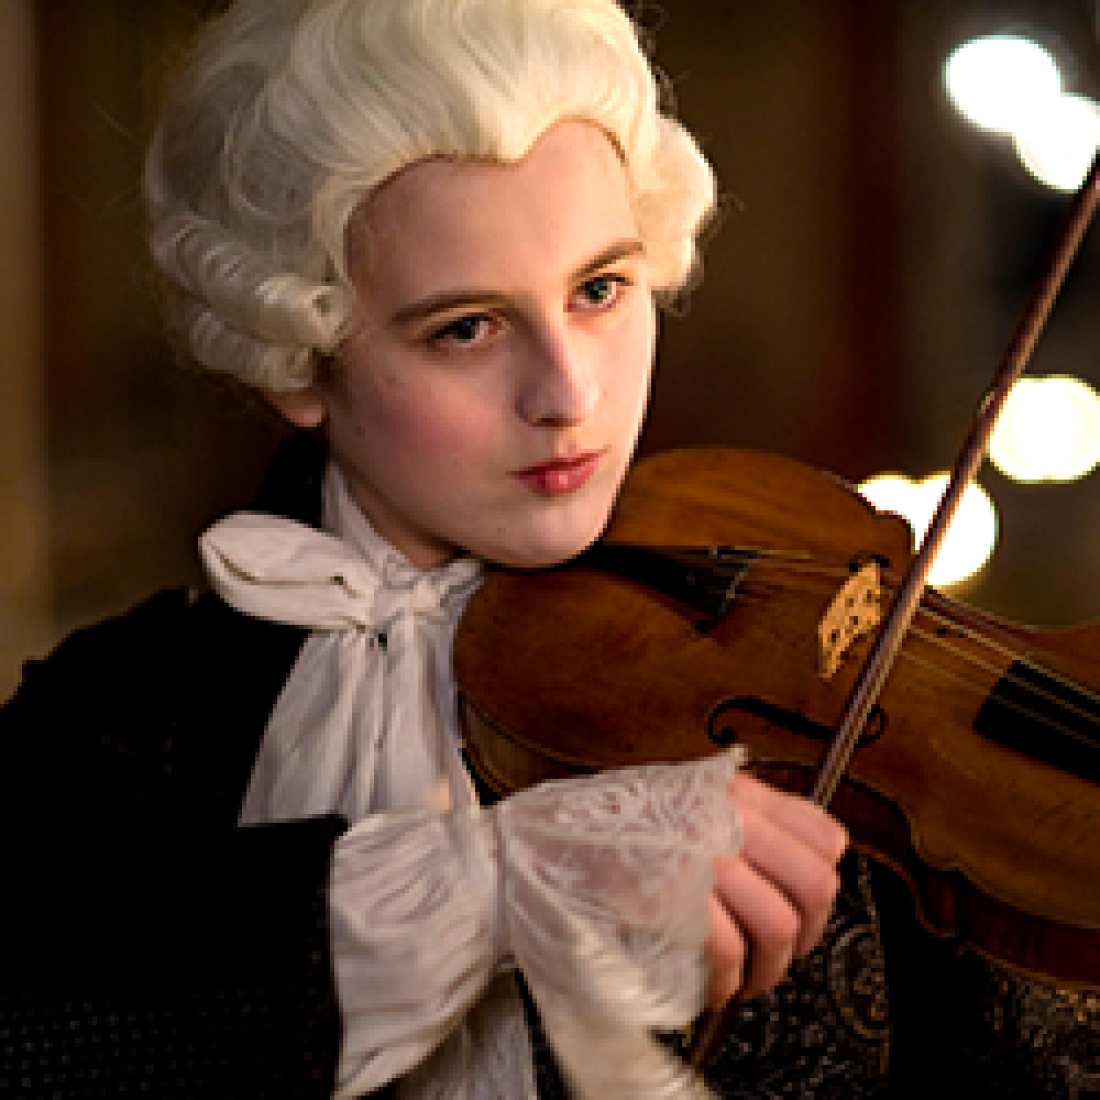 Still of Maria Anna in white period wig playing the violin from the film Mozart's sister